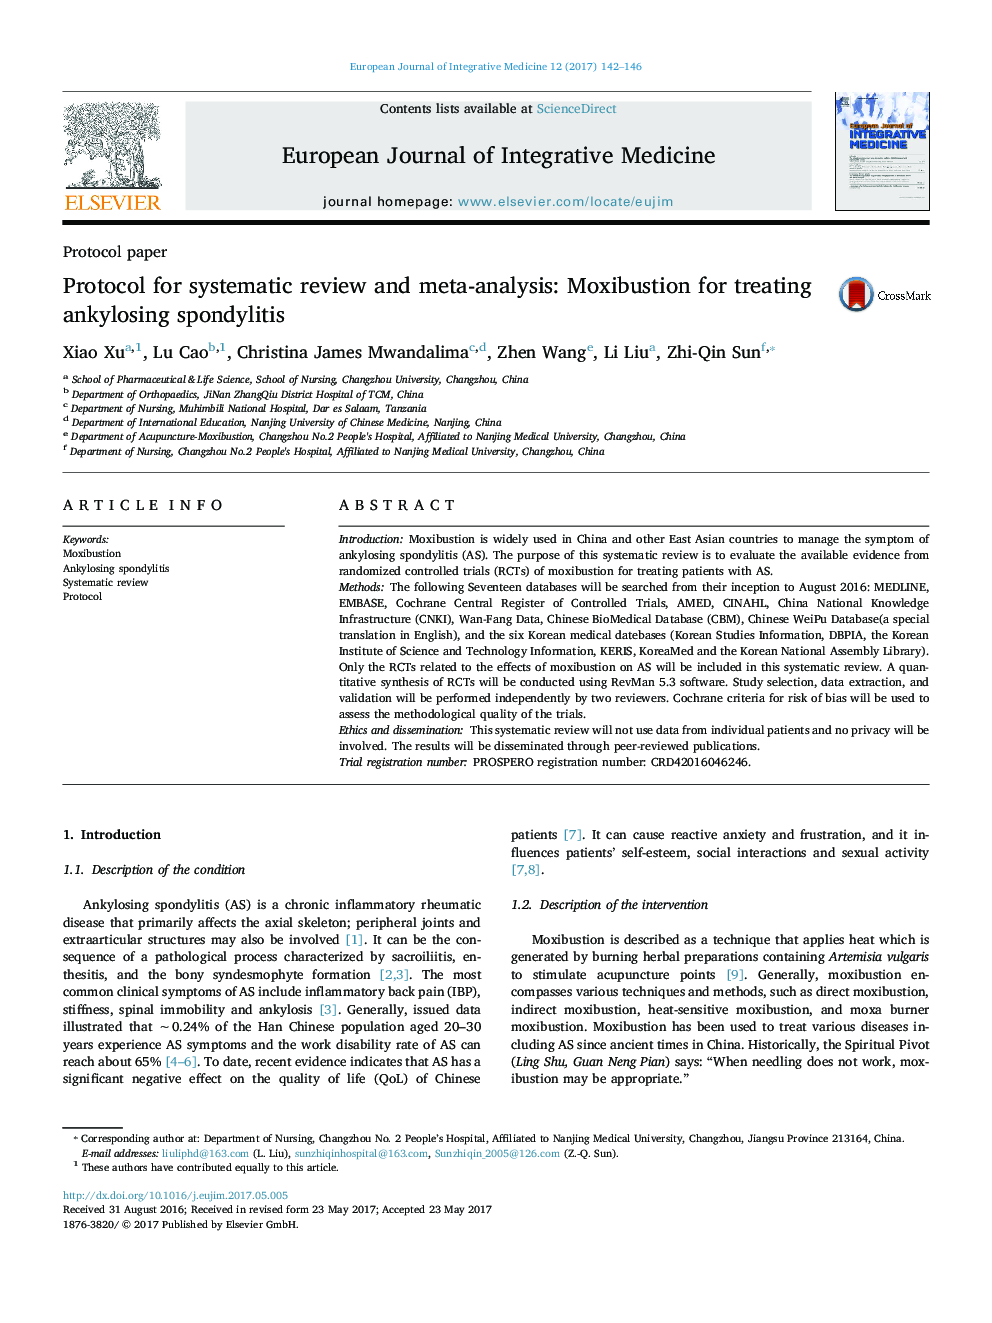 Protocol for systematic review and meta-analysis: Moxibustion for treating ankylosing spondylitis